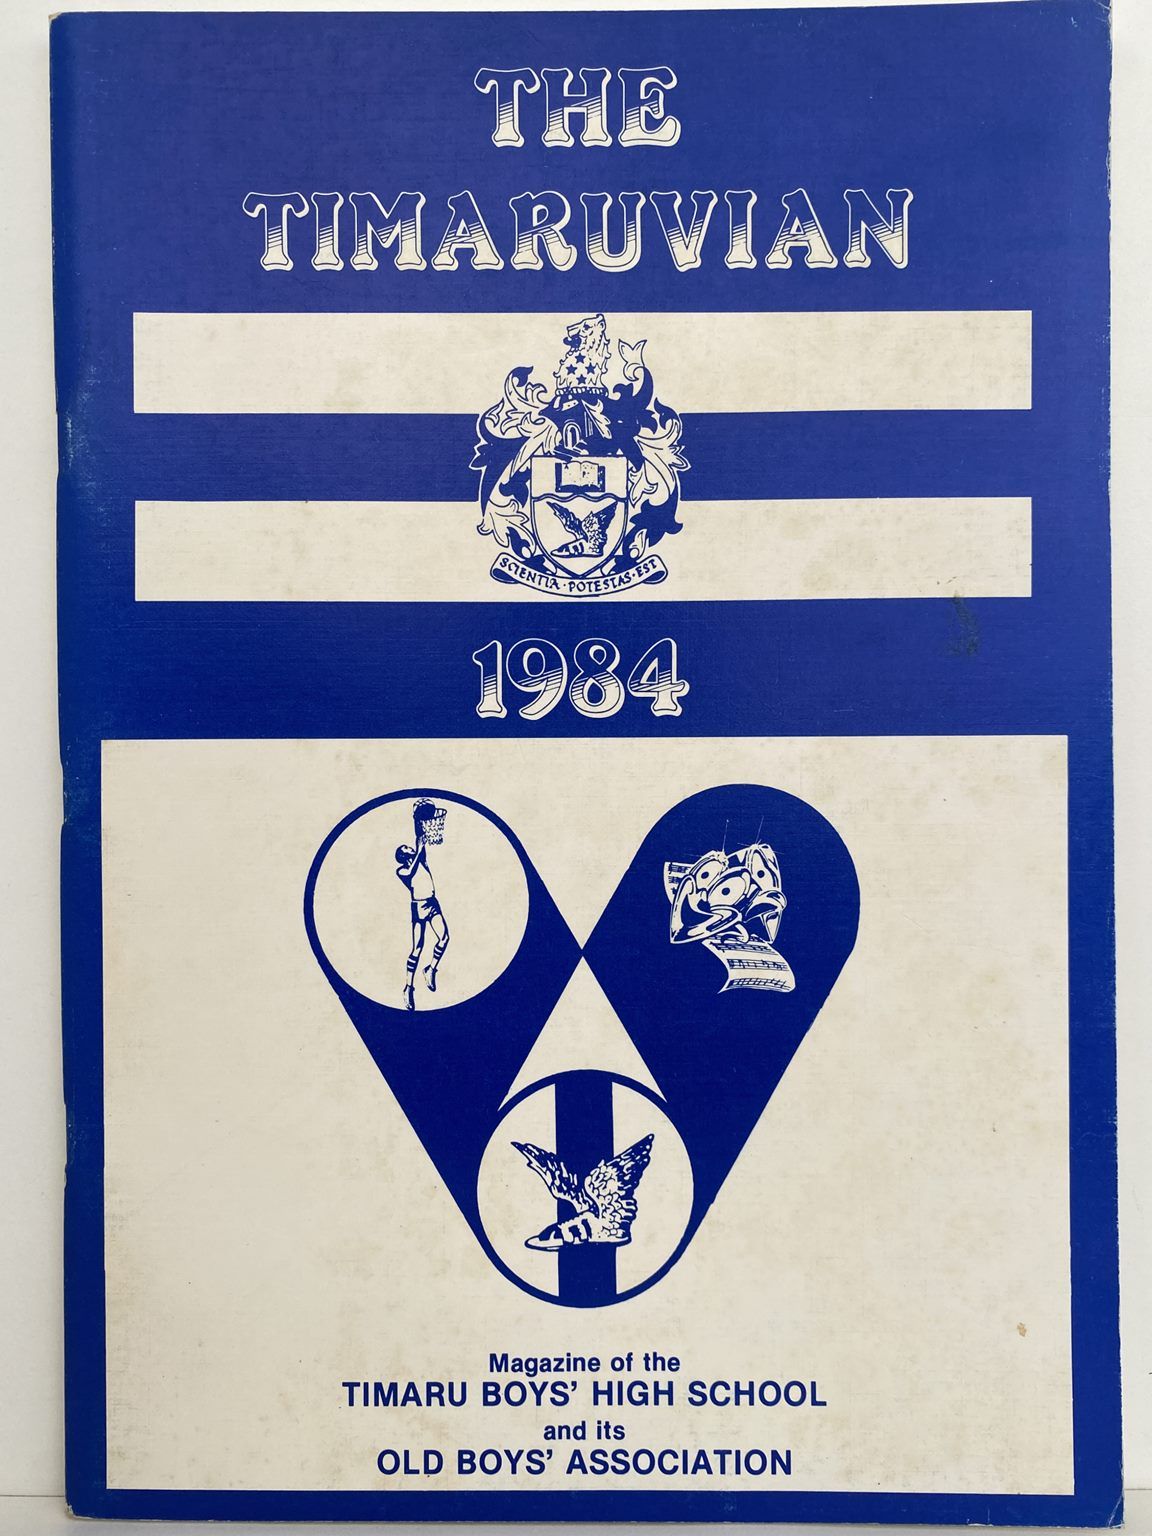 THE TIMARUVIAN: Magazine of the Timaru Boys' High School and its Old Boys' Association 1984